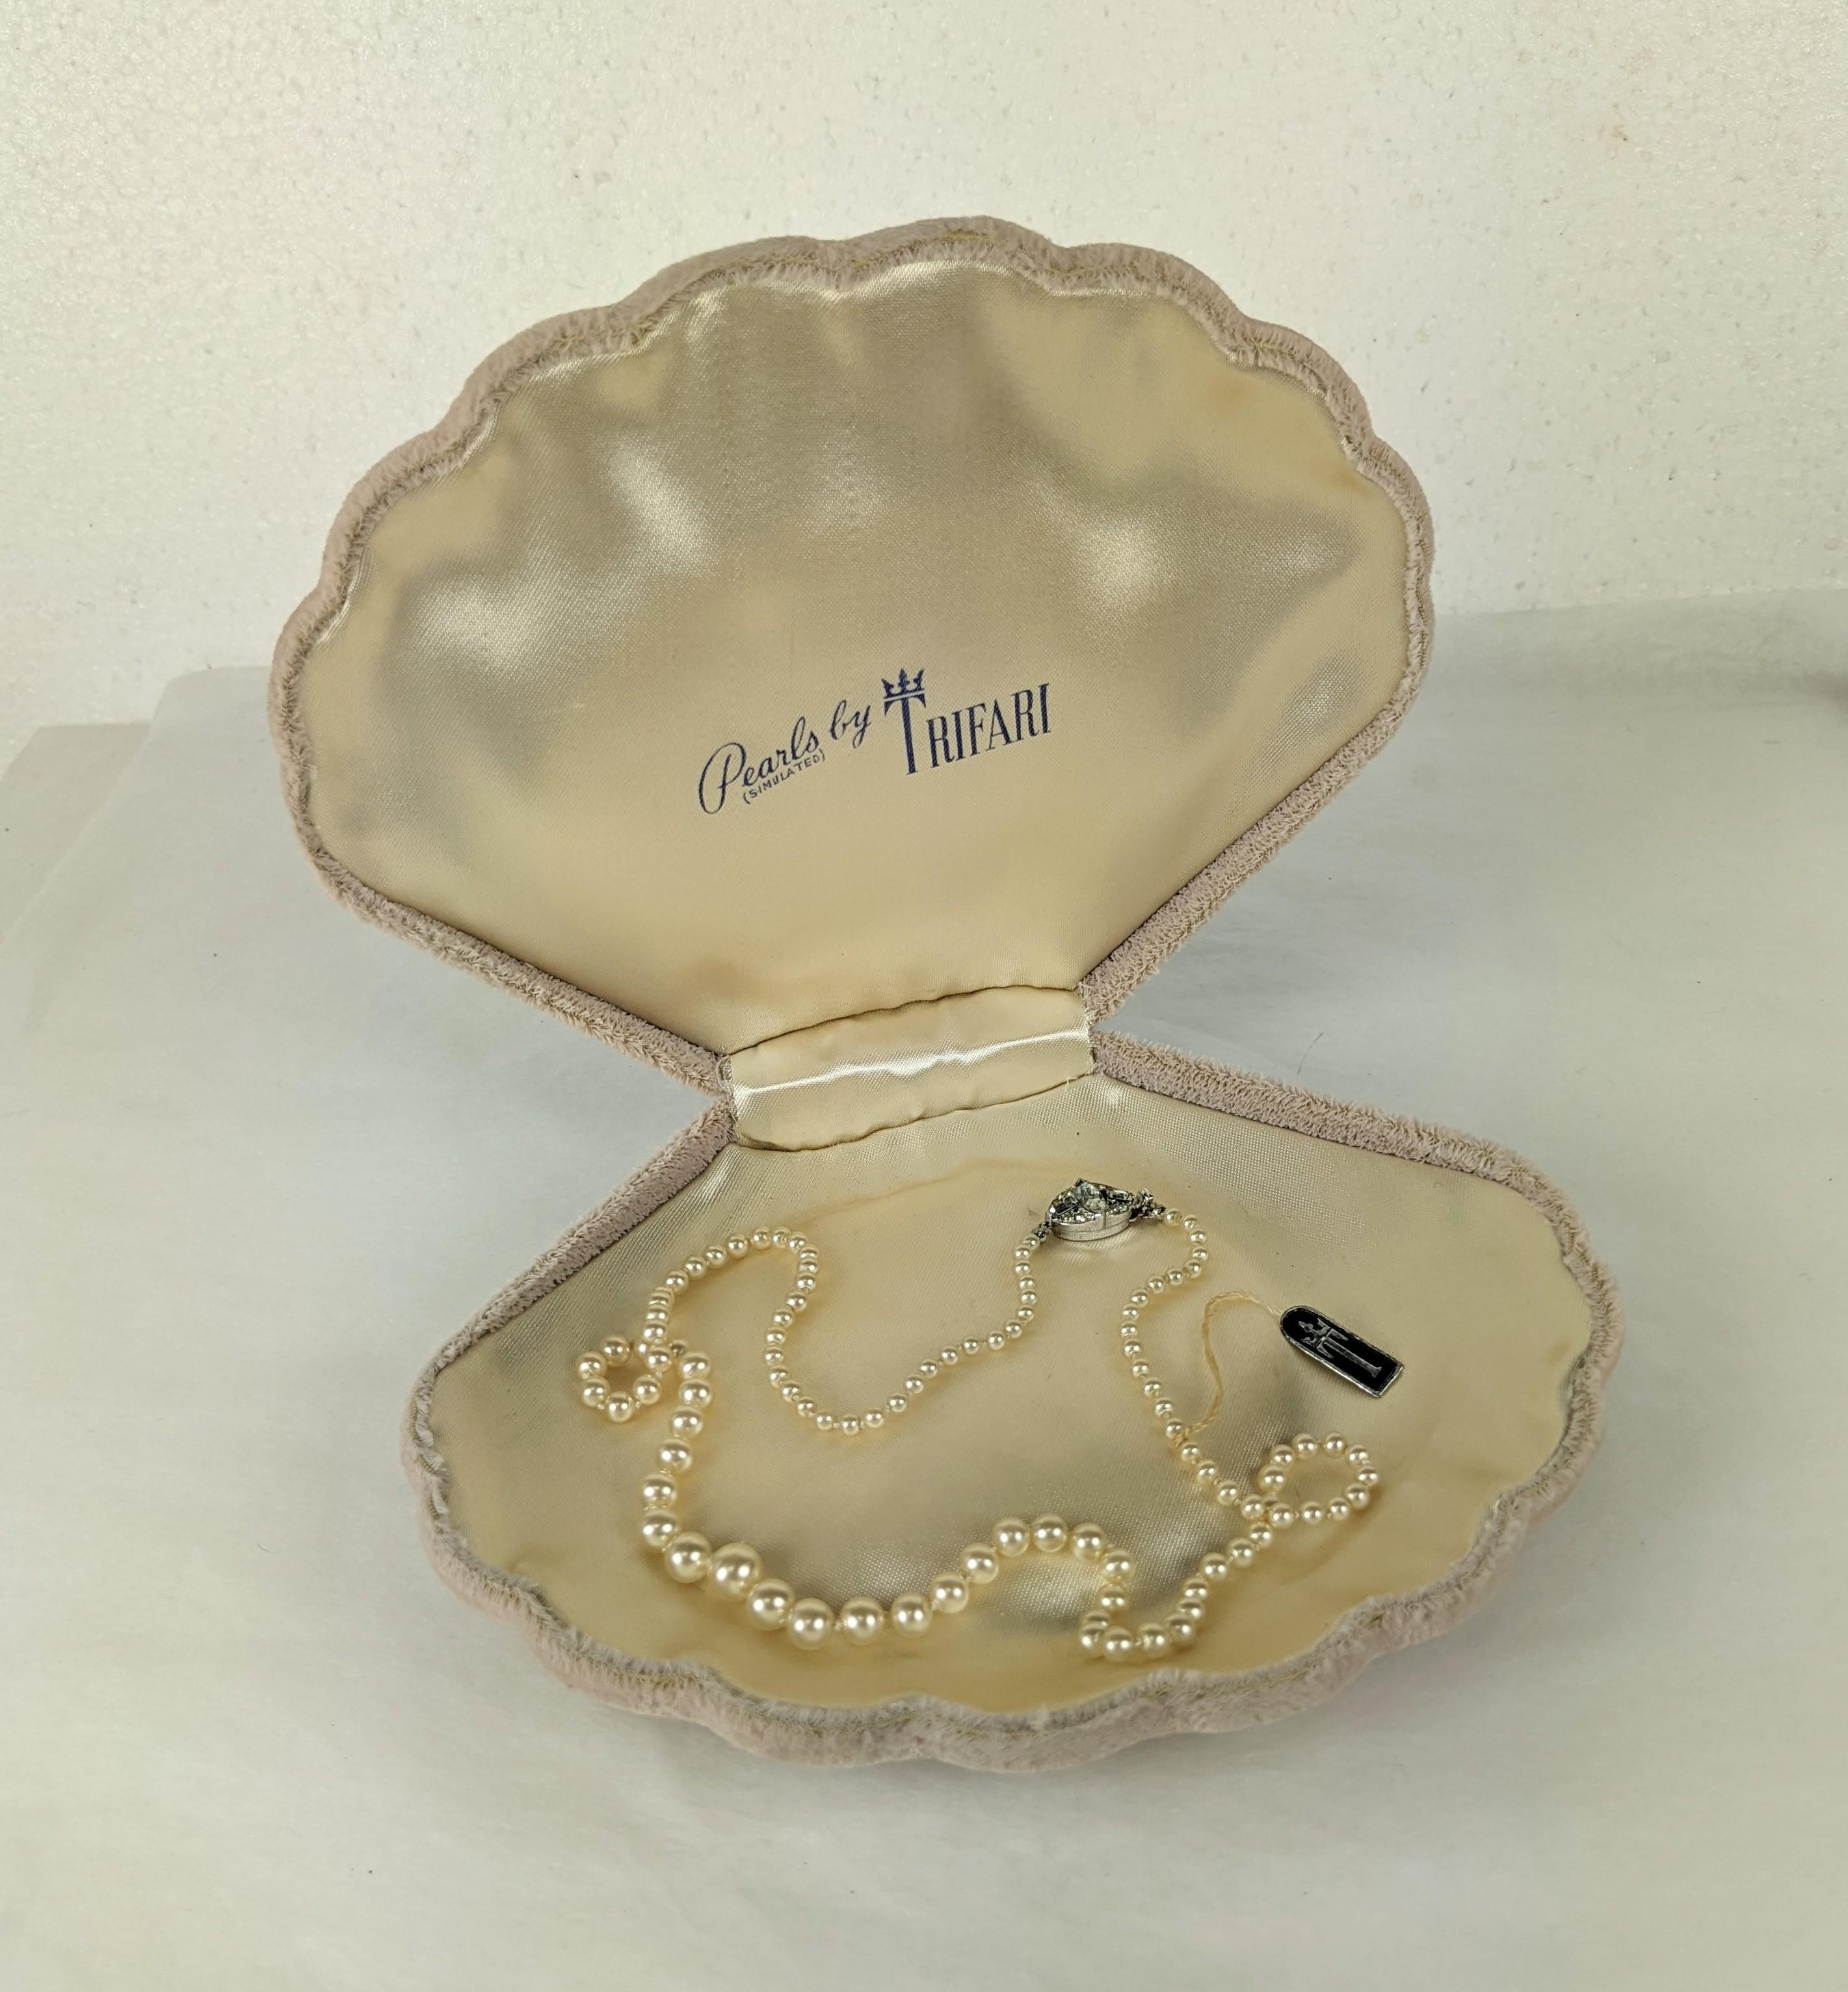 Trifari Faux Pearls with rare Original Shell Box in velvet. Sterling paste clasp signed Trifari Sterling dating it to the 1940's. 18